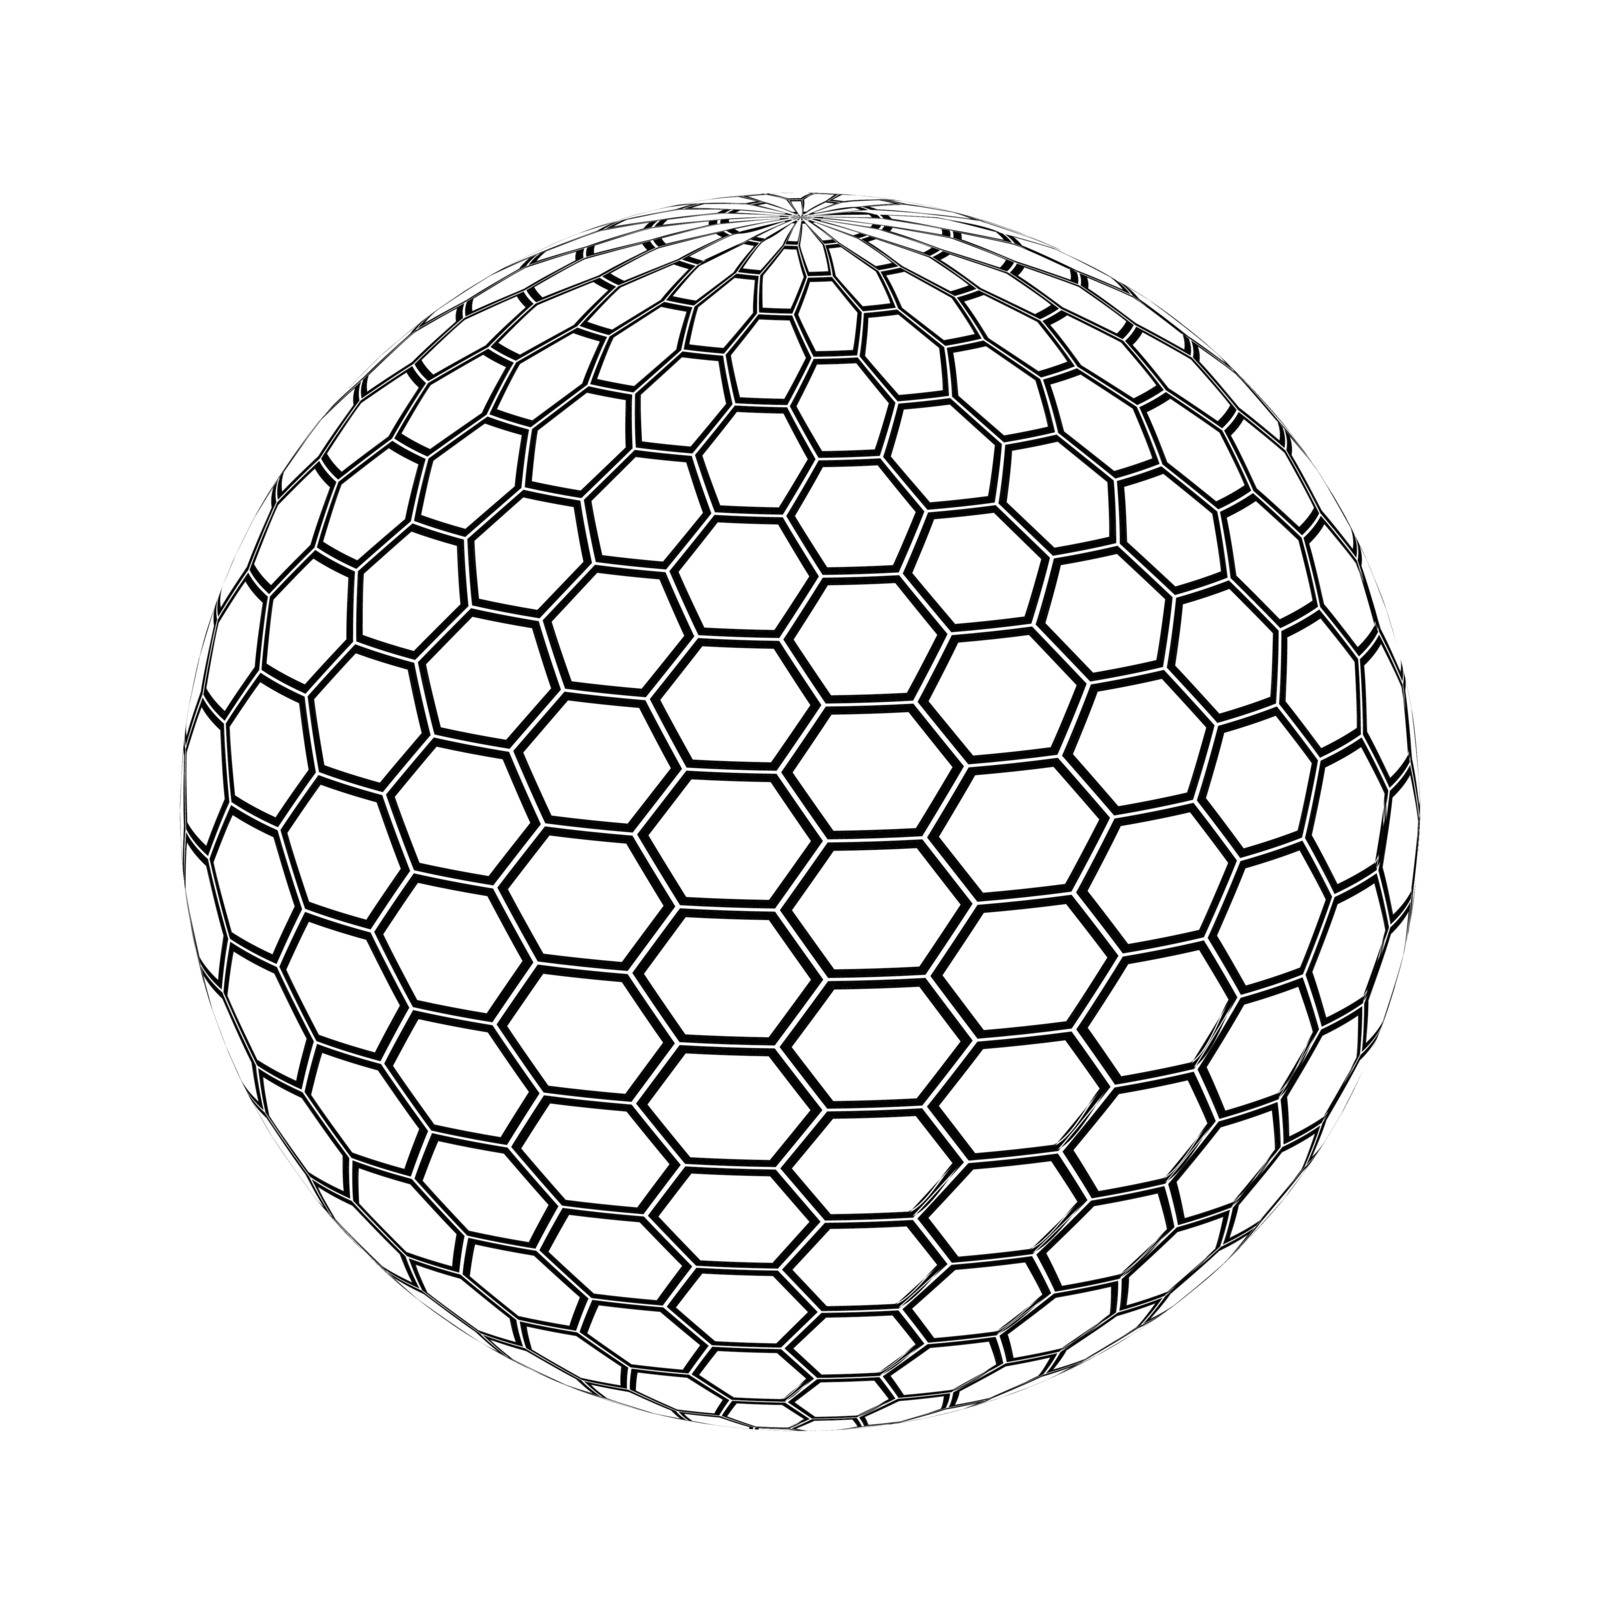 A sphere of honeycombs over a white background